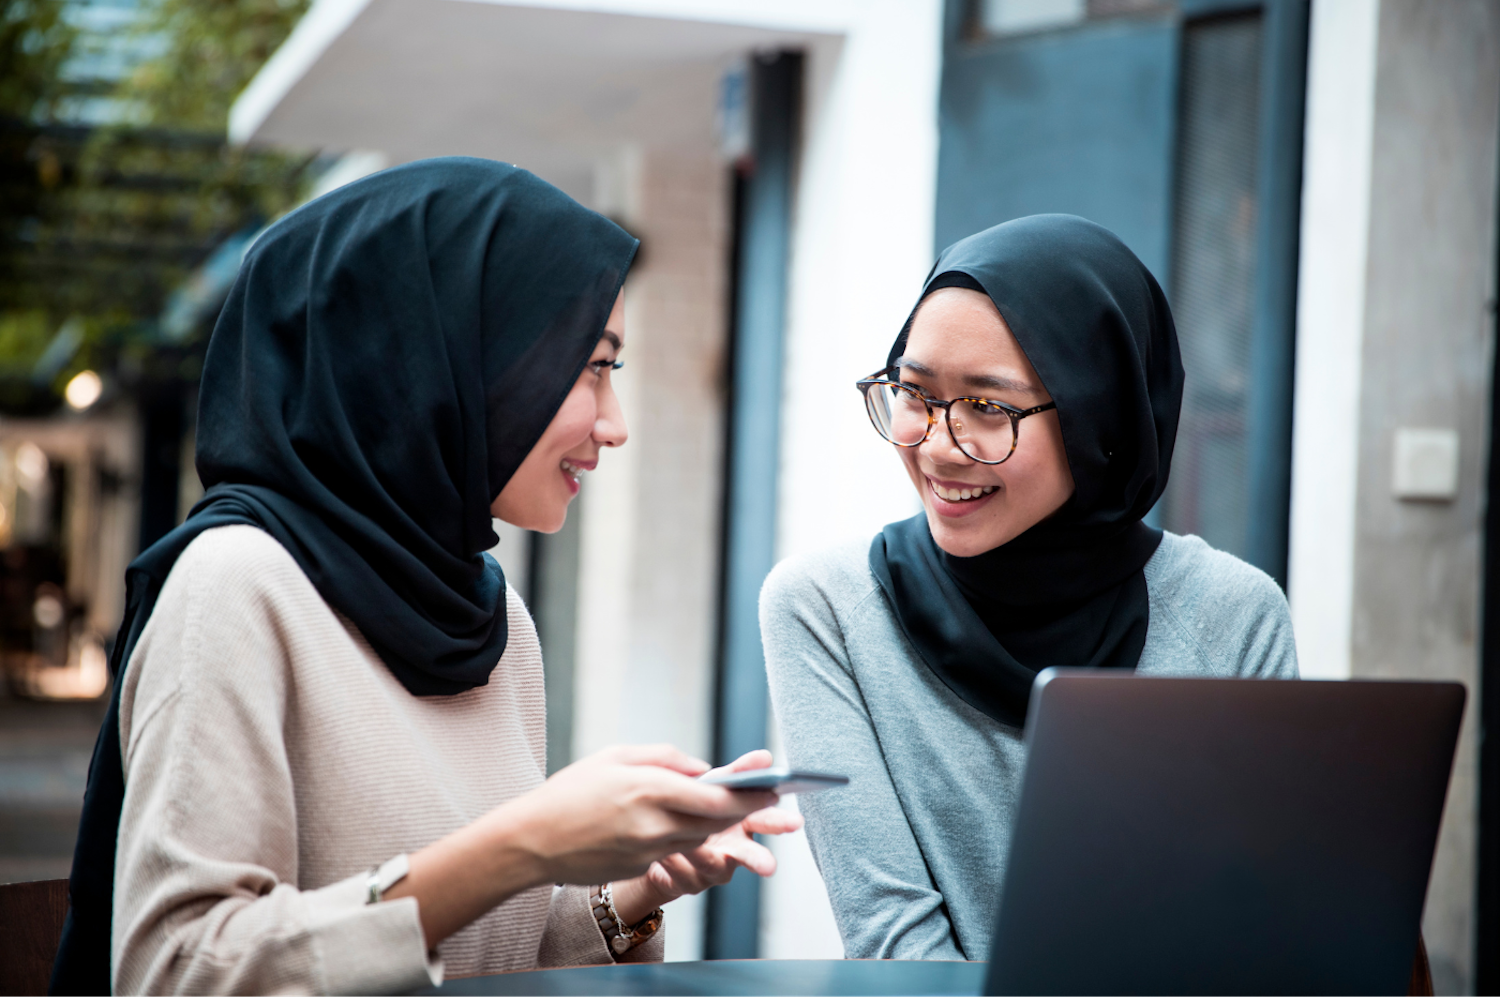 A photo of two Malaysians in head coverings smile and look at each other while they look at a laptop computer. One holds a phone.